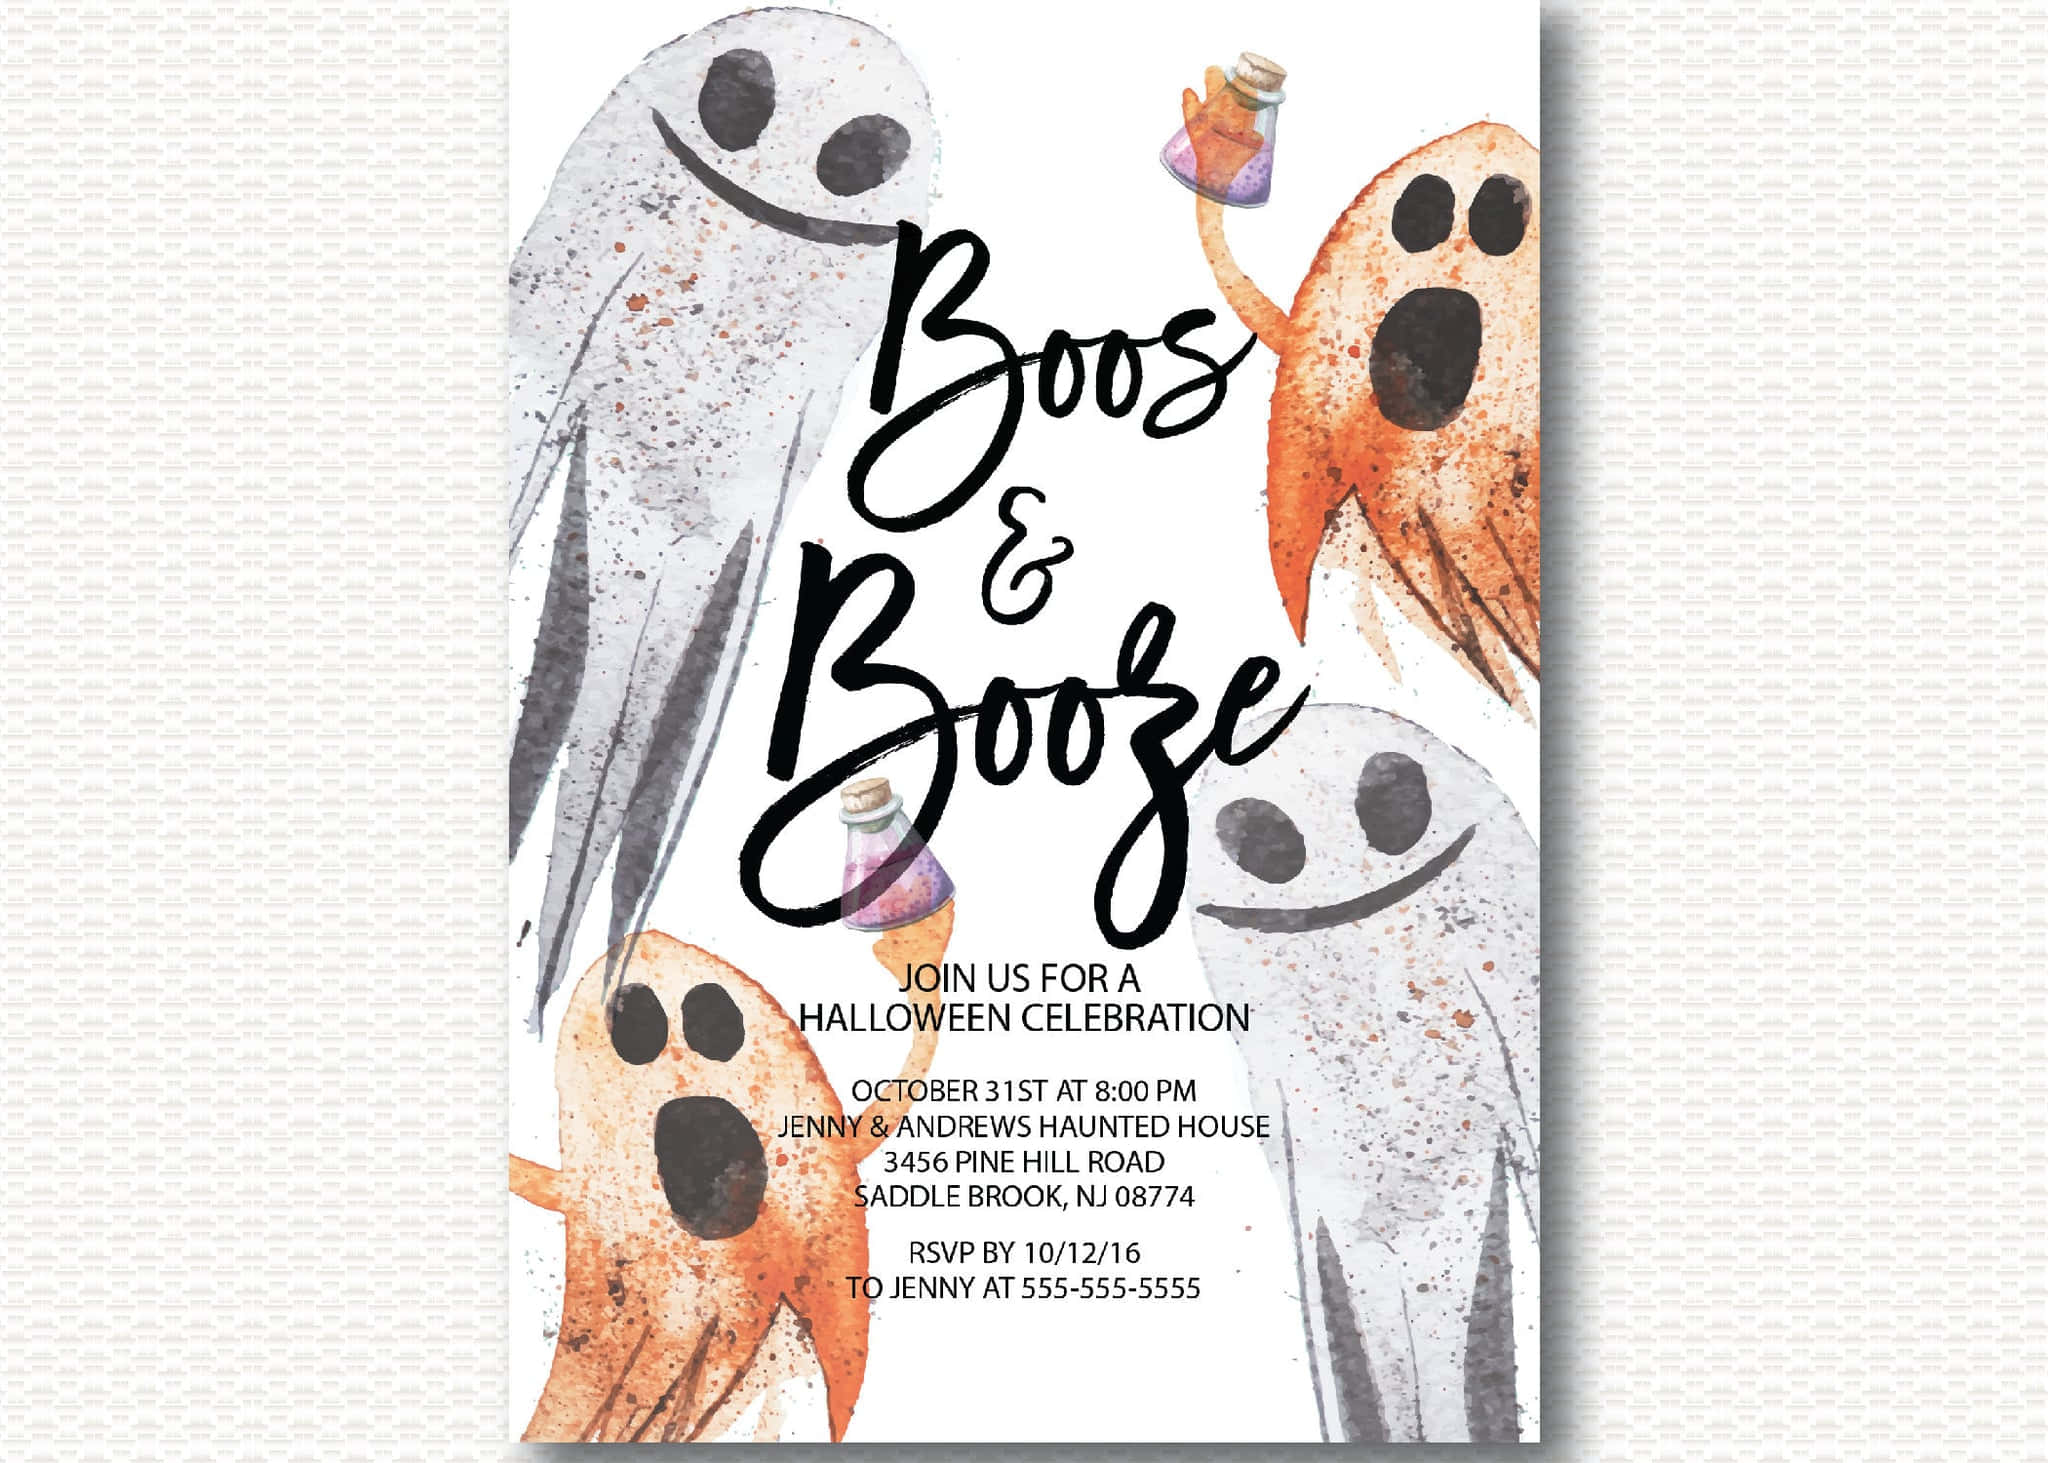 Kick off the Halloween festivities with spooky invitations! Wallpaper